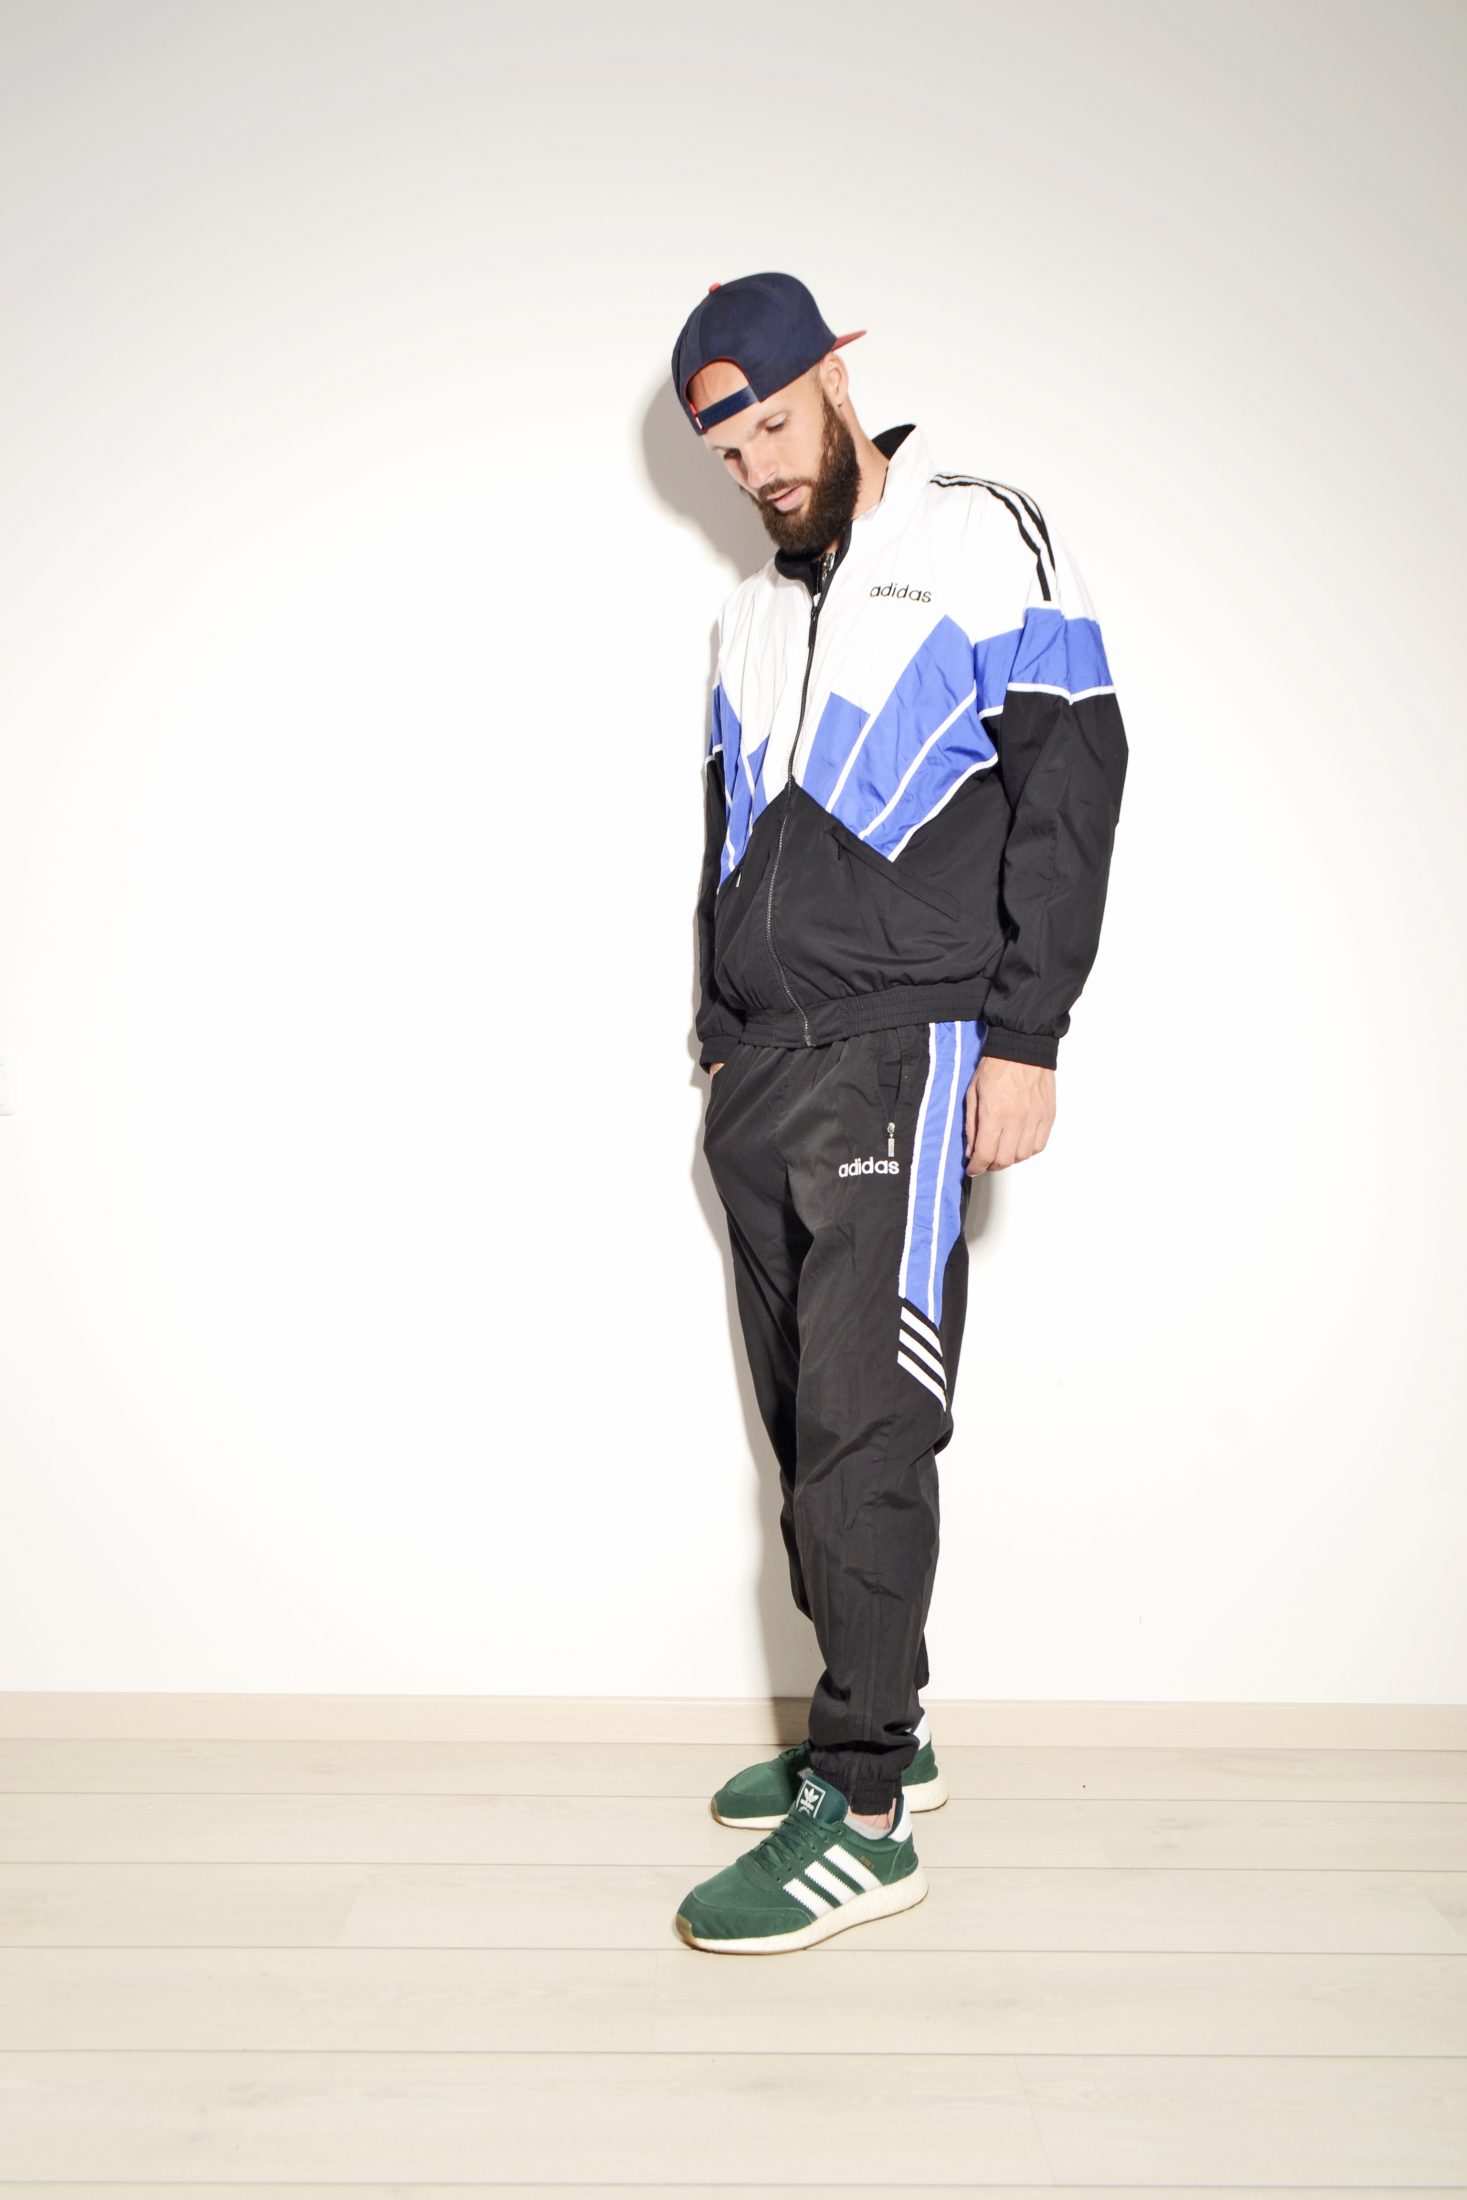 Adidas 90s vintage shell suit | HOT MILK 90's style vintage clothing online